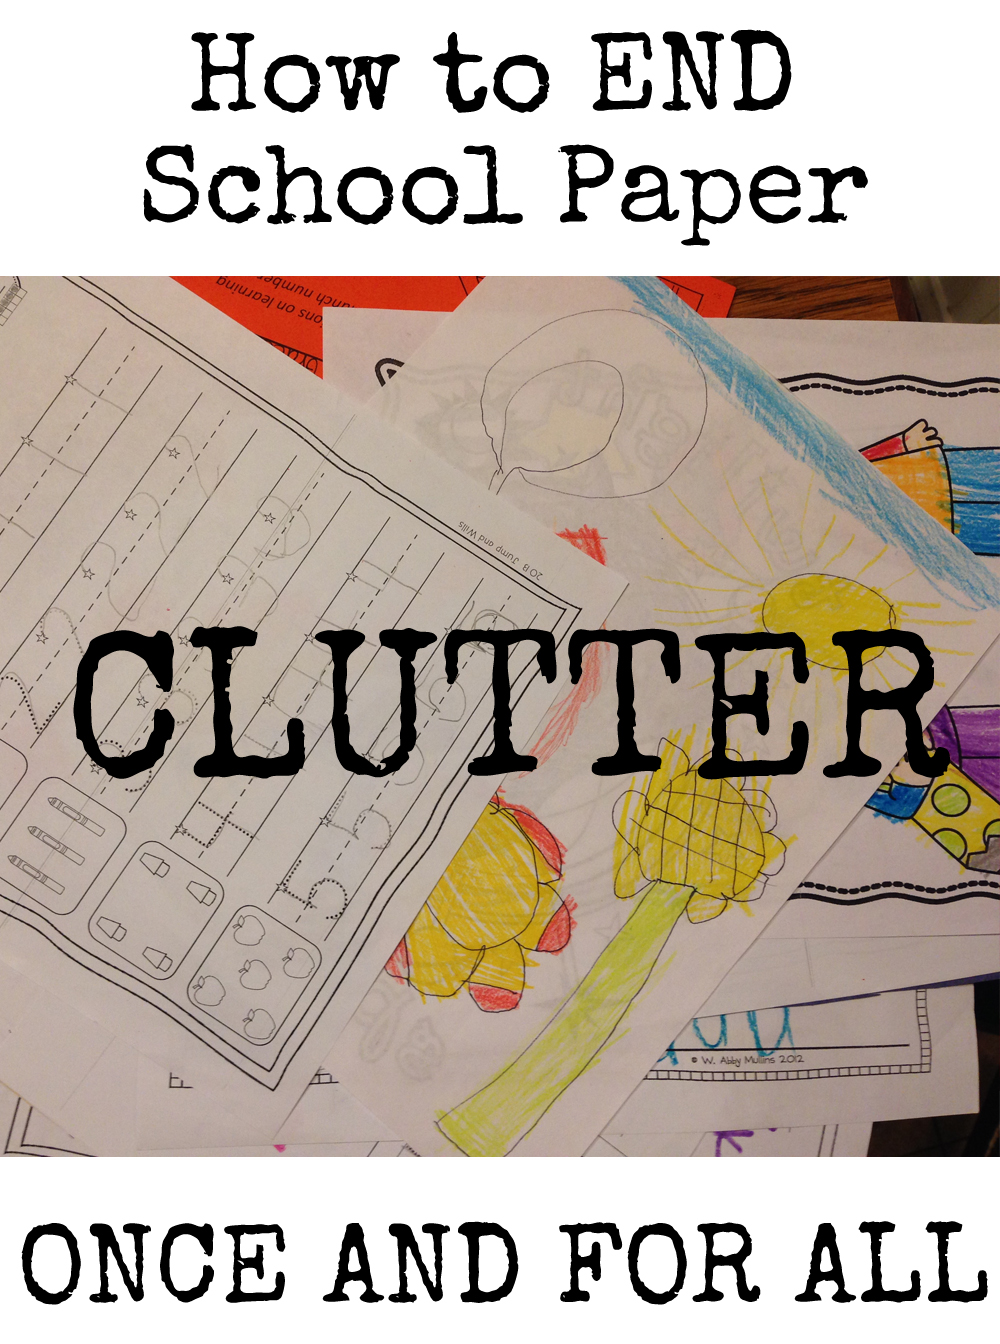 How to Organize School Papers